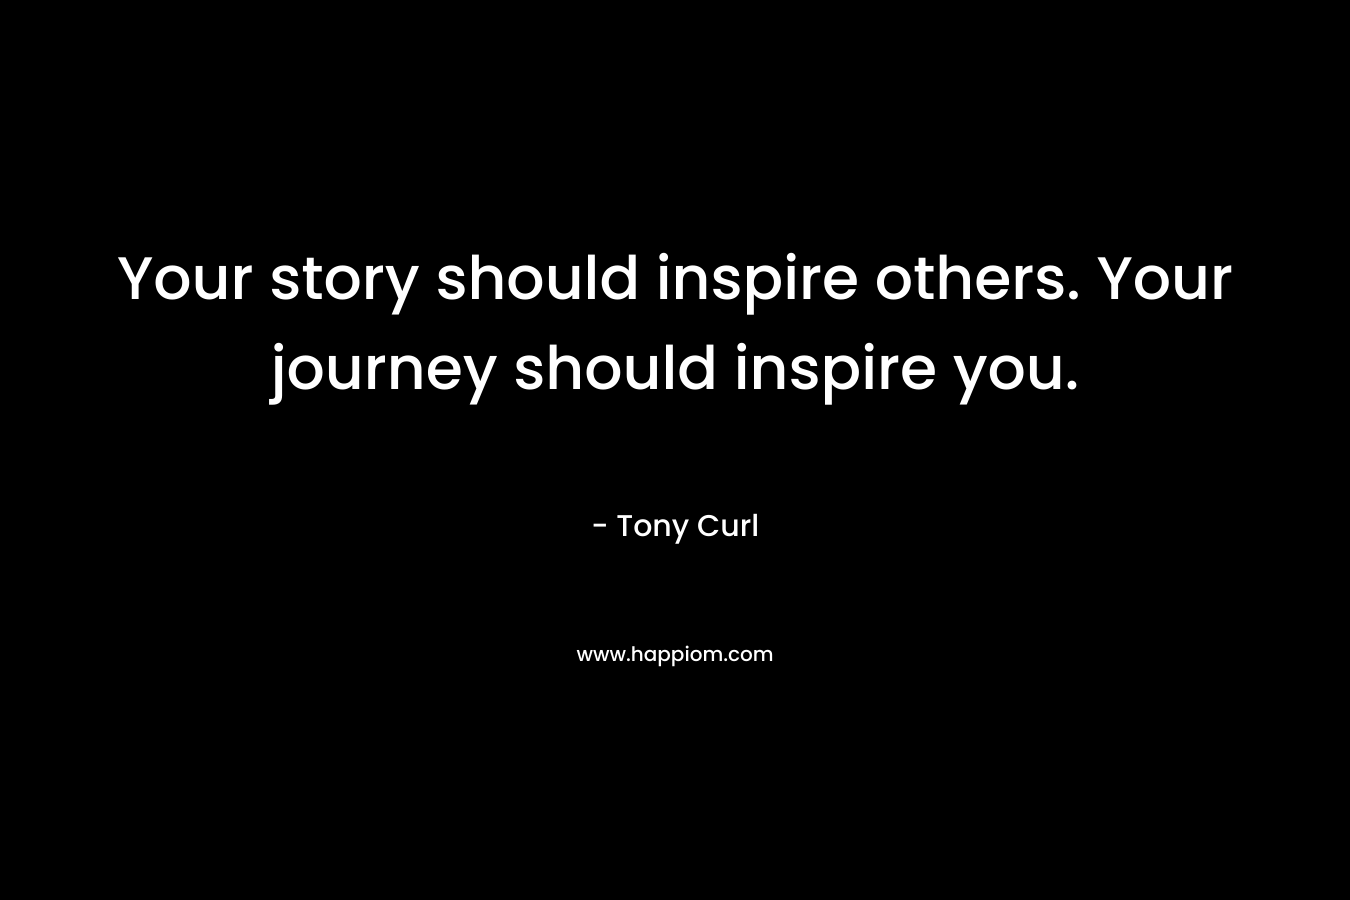 Your story should inspire others. Your journey should inspire you. – Tony Curl